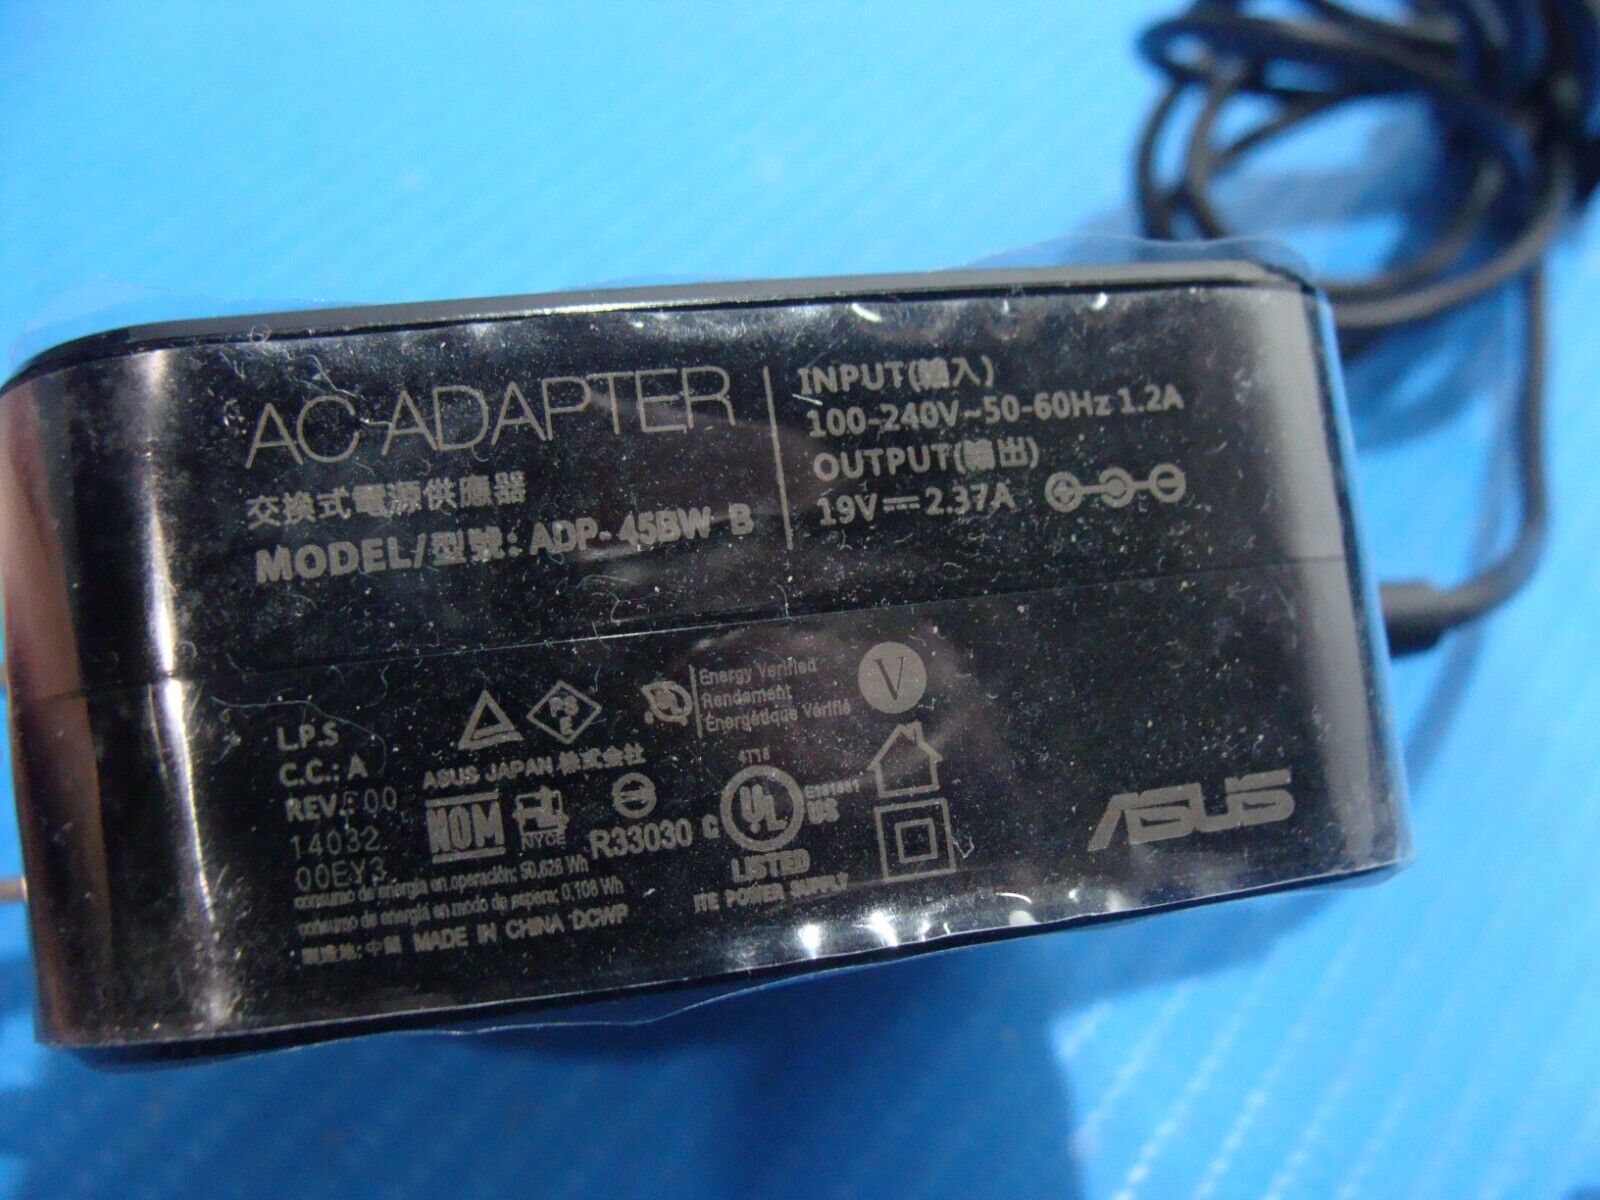 NEW Genuine 45W Asus Laptop Charger Adapter 5.5 mm x 2.5mm ADP-45BW B, AD883J20